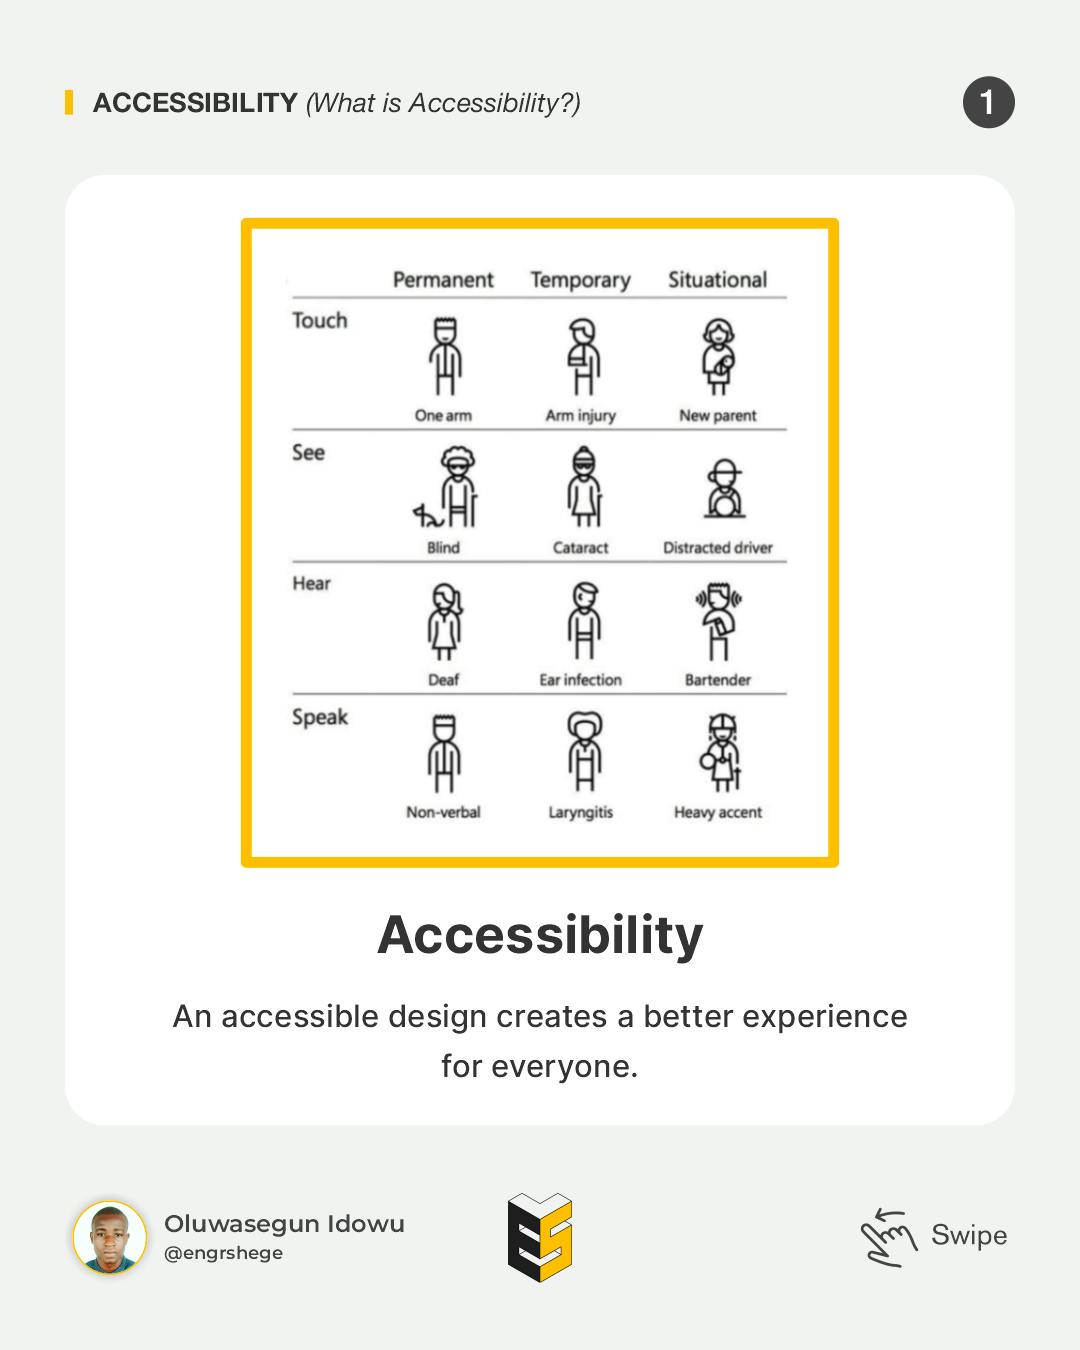 1. What is Accessibility?